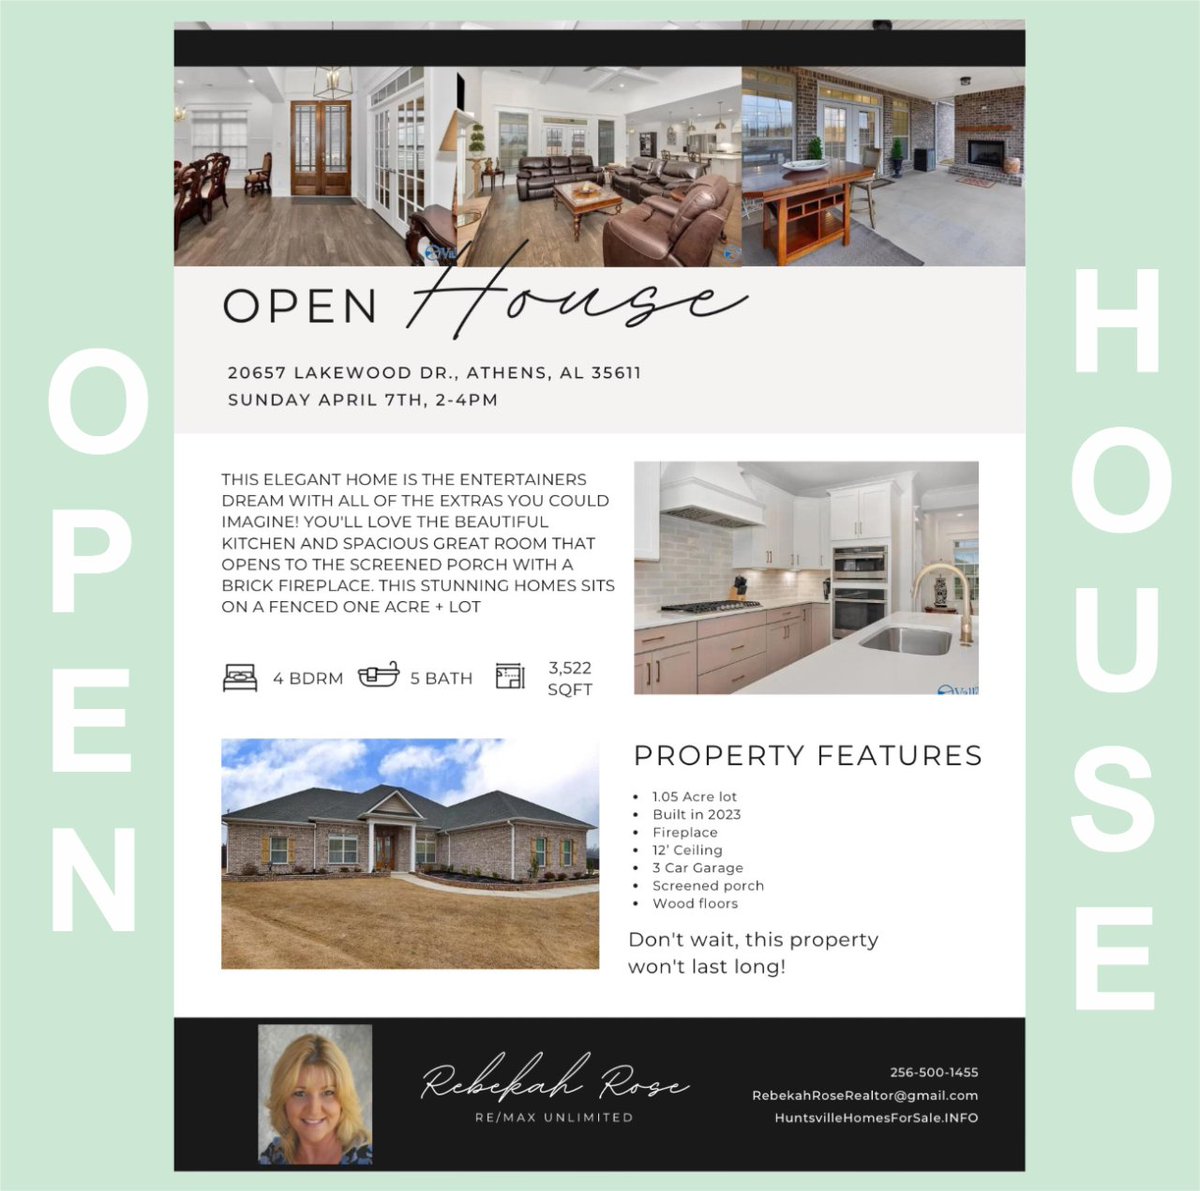 😎 Don't miss your opportunity! Check out this beautiful 4 BR, 5 BA home Athens Alabama. Visit our Open House Sunday 2p-4p. Call or text me at 256-500-1544 for a private tour.

#huntsvillehomesforsale #rebekahroserealtor #madisoncountyalhomes #huntsvilleopenhouse #athensalabama